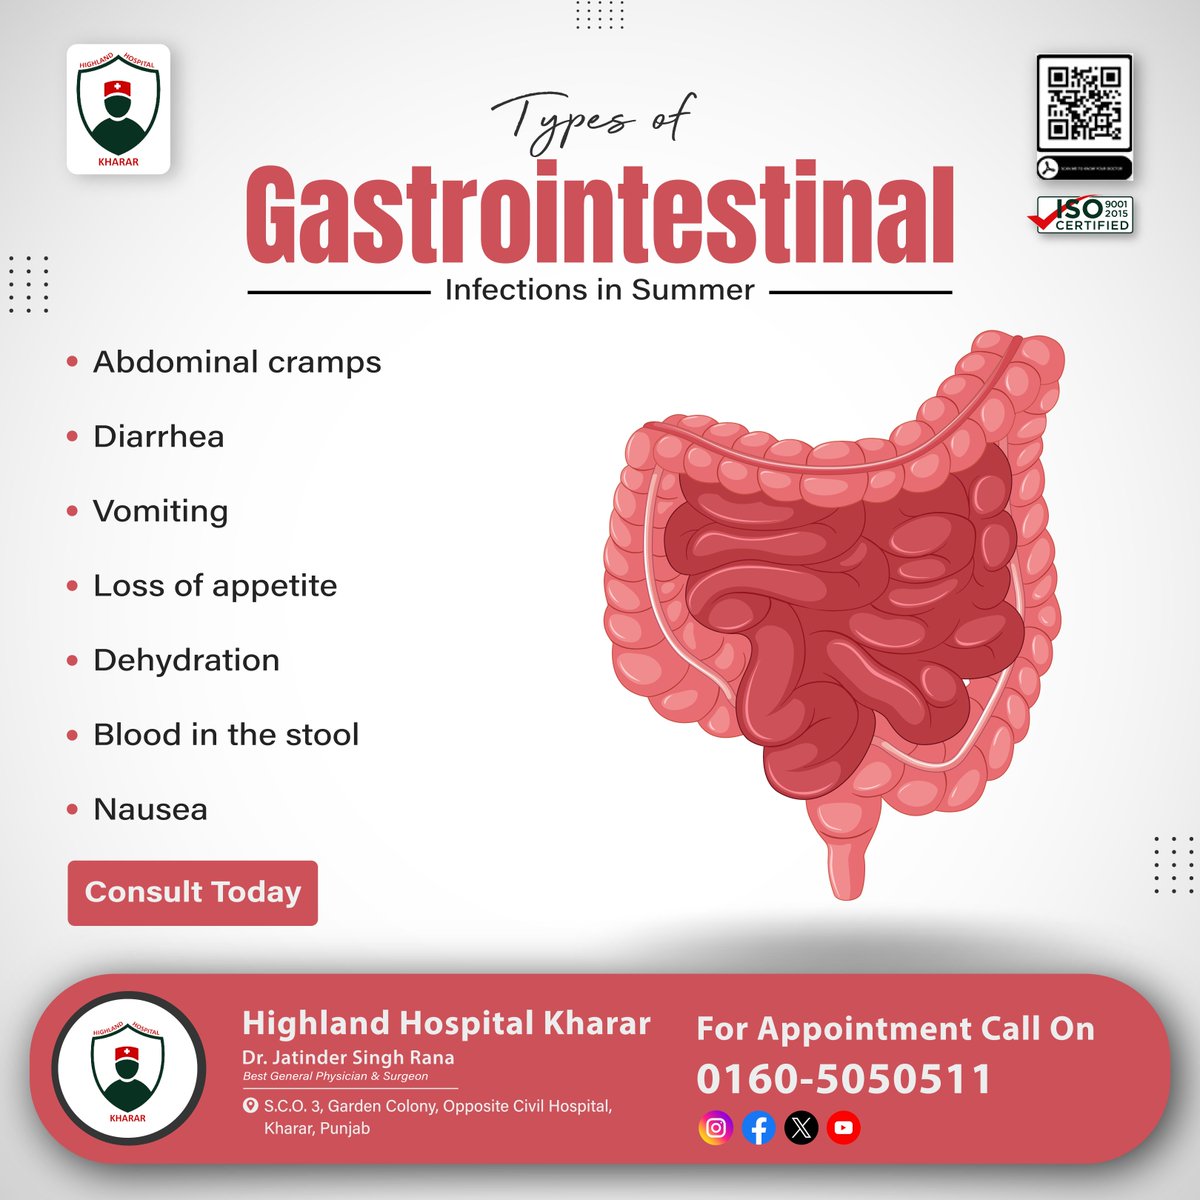 Summer's here, but so are #gastrointestinal #infections! Let's look into the types that are common during this season. Stay aware, stay #healthy with #HighlandHospitalKharar!
.
#gasto #gastronomy #acidity #Kharar #Mohali #DrJatinderSingh #Besthospital #HealthAwareness